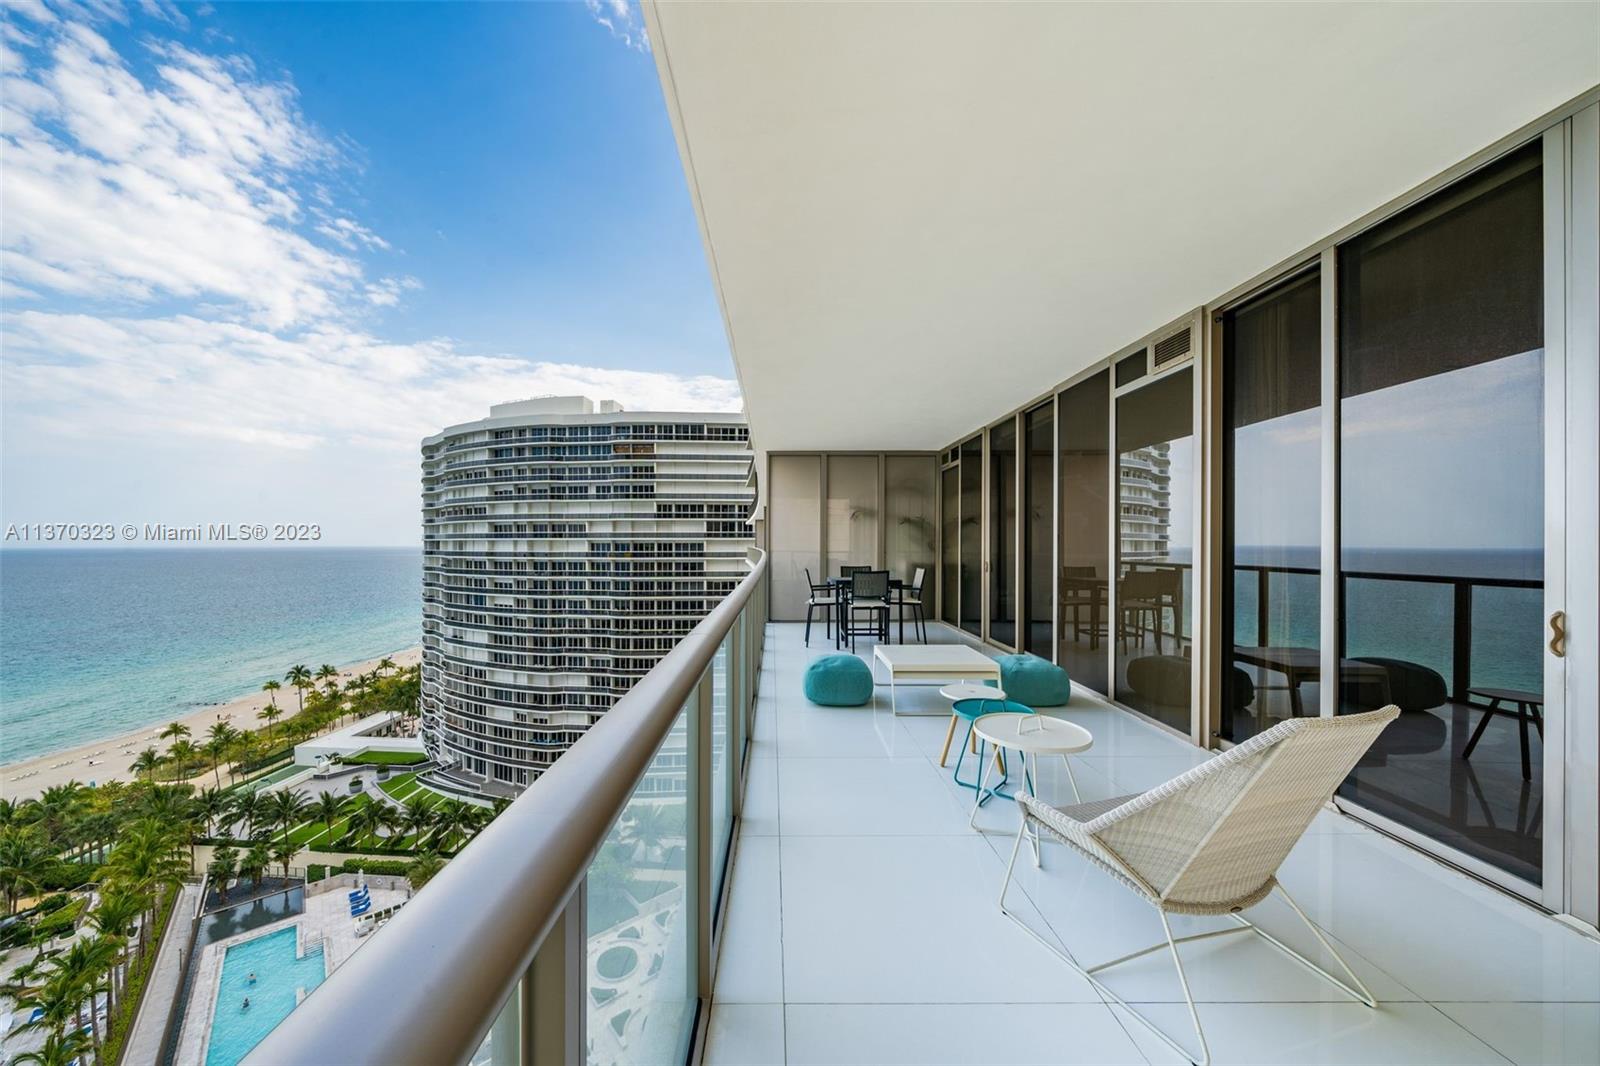 Best deal at the iconic St. Regis Bal Harbour!Spectacular 4 bedrooms, 4.5 bath residence featuring east & west flow through floor plan with panoramic views of the Atlantic Ocean, Intracoastal, Bay, and Miami skyline. Unit includes private elevator landing,high end appliances with comtemporay kitchen design and high end finishes throughout.  The St Regis Bal Harbour Residences offers  unsurpassed amenities including 24-hour concierge, valet, Restaurant  & Bar, room service, beach & pool services, state of the art gym /Spa and much more. See Broker remarks